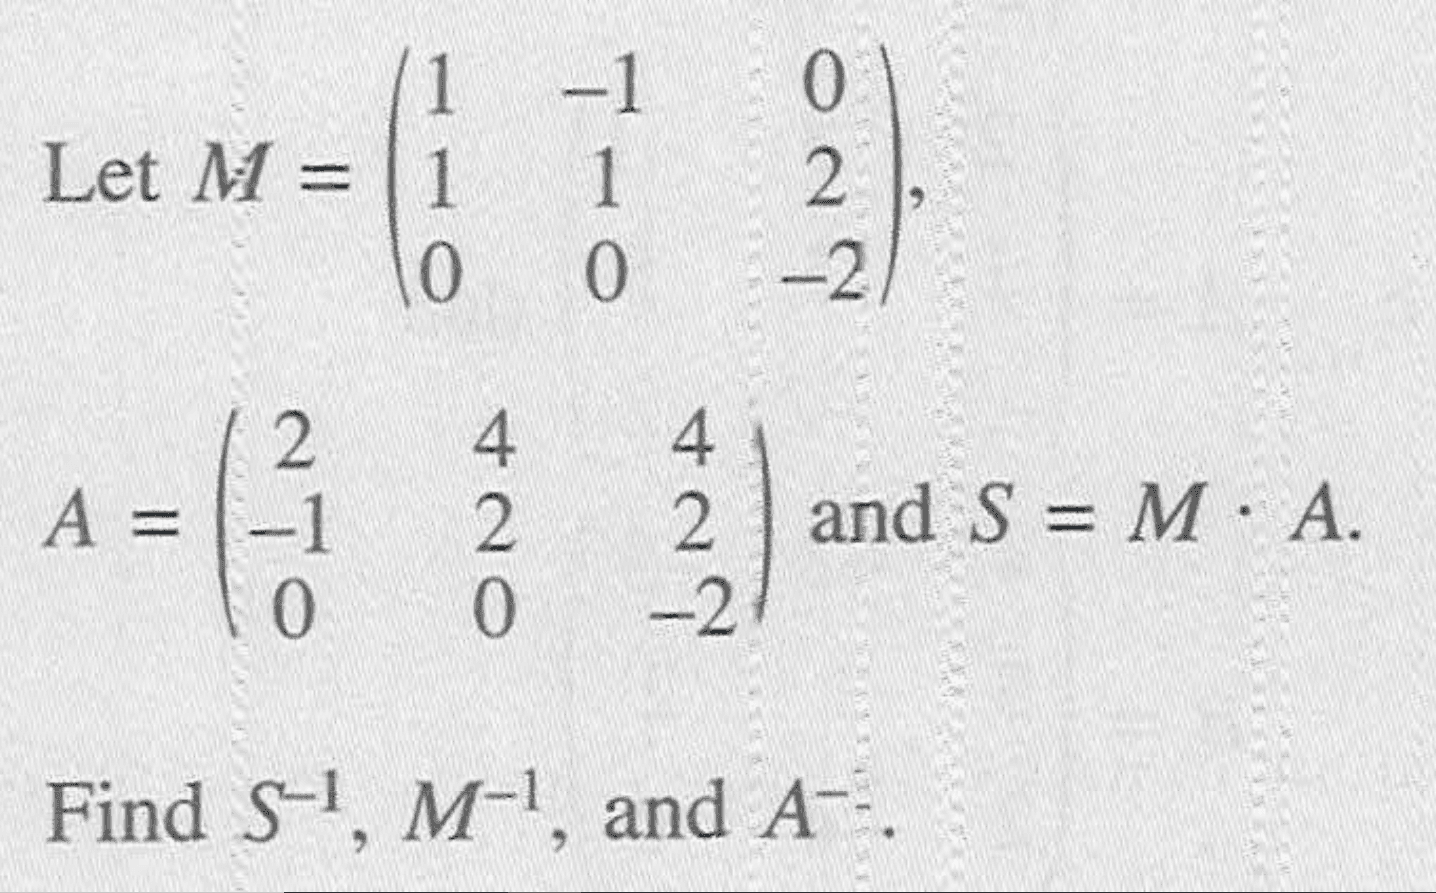 Let M=(1 -1 0 1 1 2 0 0 -2), A=(2 4 4 -1 2 2 0 0 -2) and S=M.A. Find S^-1, M^-1, and A^-1.